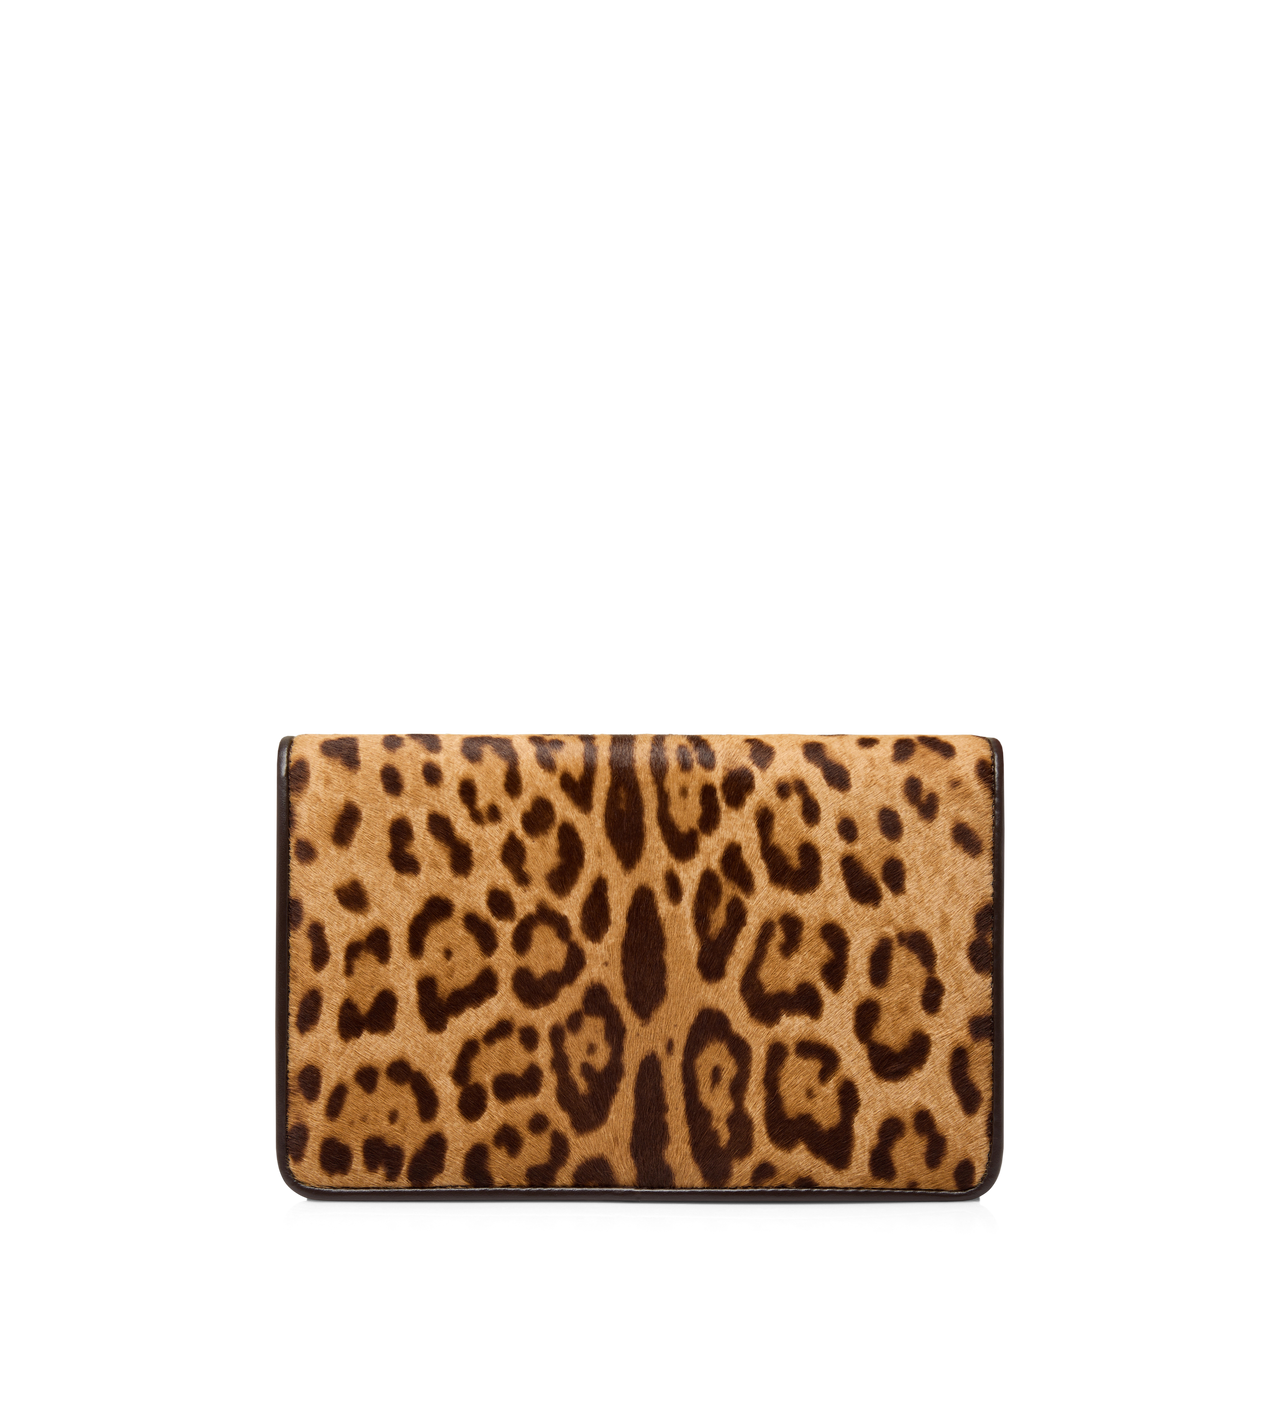 LEOPARD PRINT CALF HAIR WHITNEY SMALL SHOULDER BAG image number 2